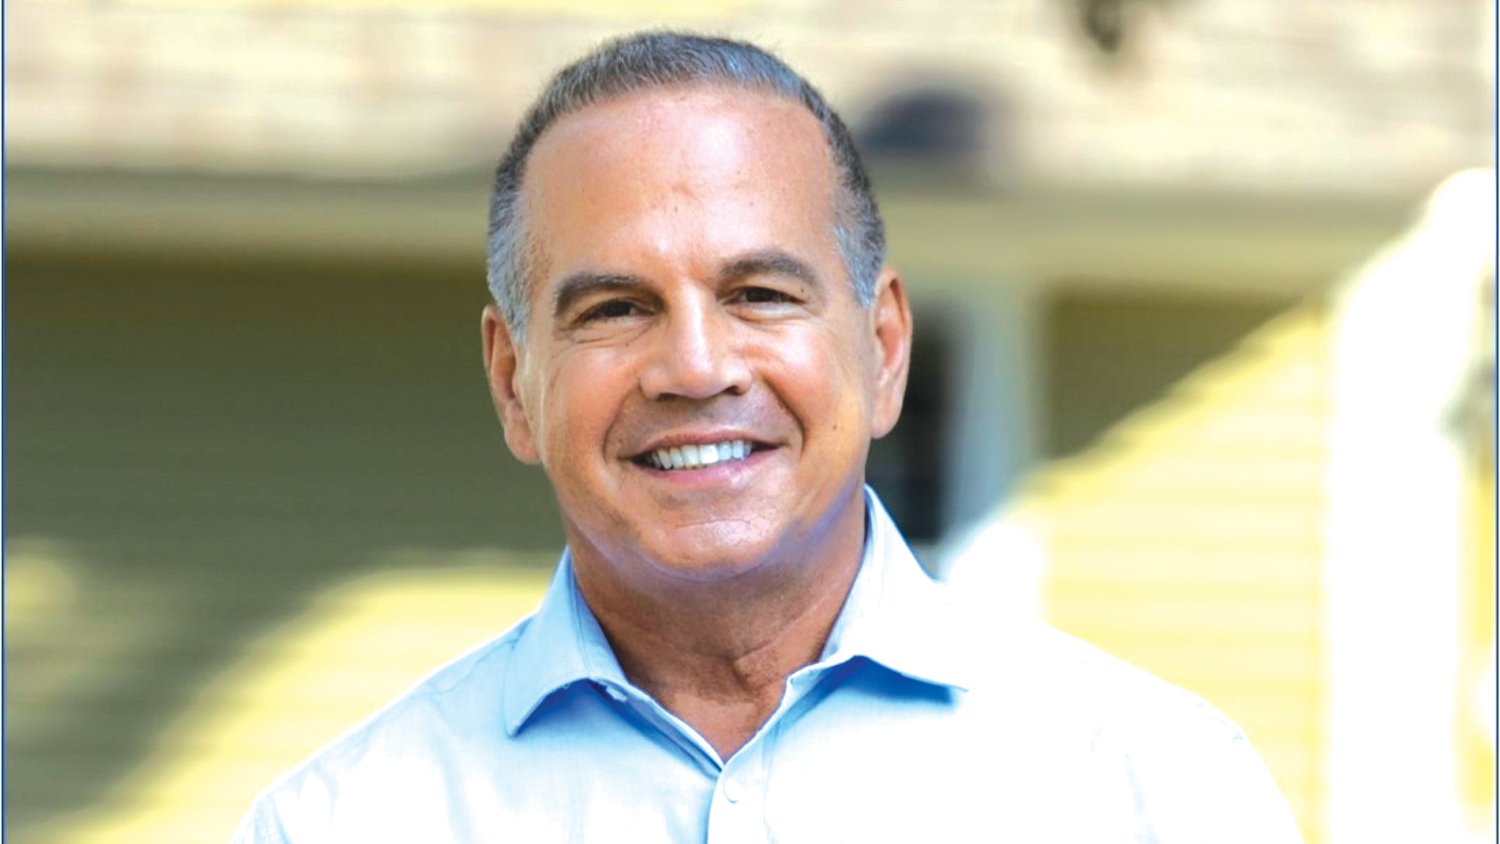 VACATING SEAT: U.S. Rep. David Cicilline will give up his seat to head the Rhode Island Foundation. His salary will nearly quadruple, from $174,000 as a member of the U.S. House of Representatives, to $650,000 as CEO of the Rhode Island Foundation. (Courtesy photo)